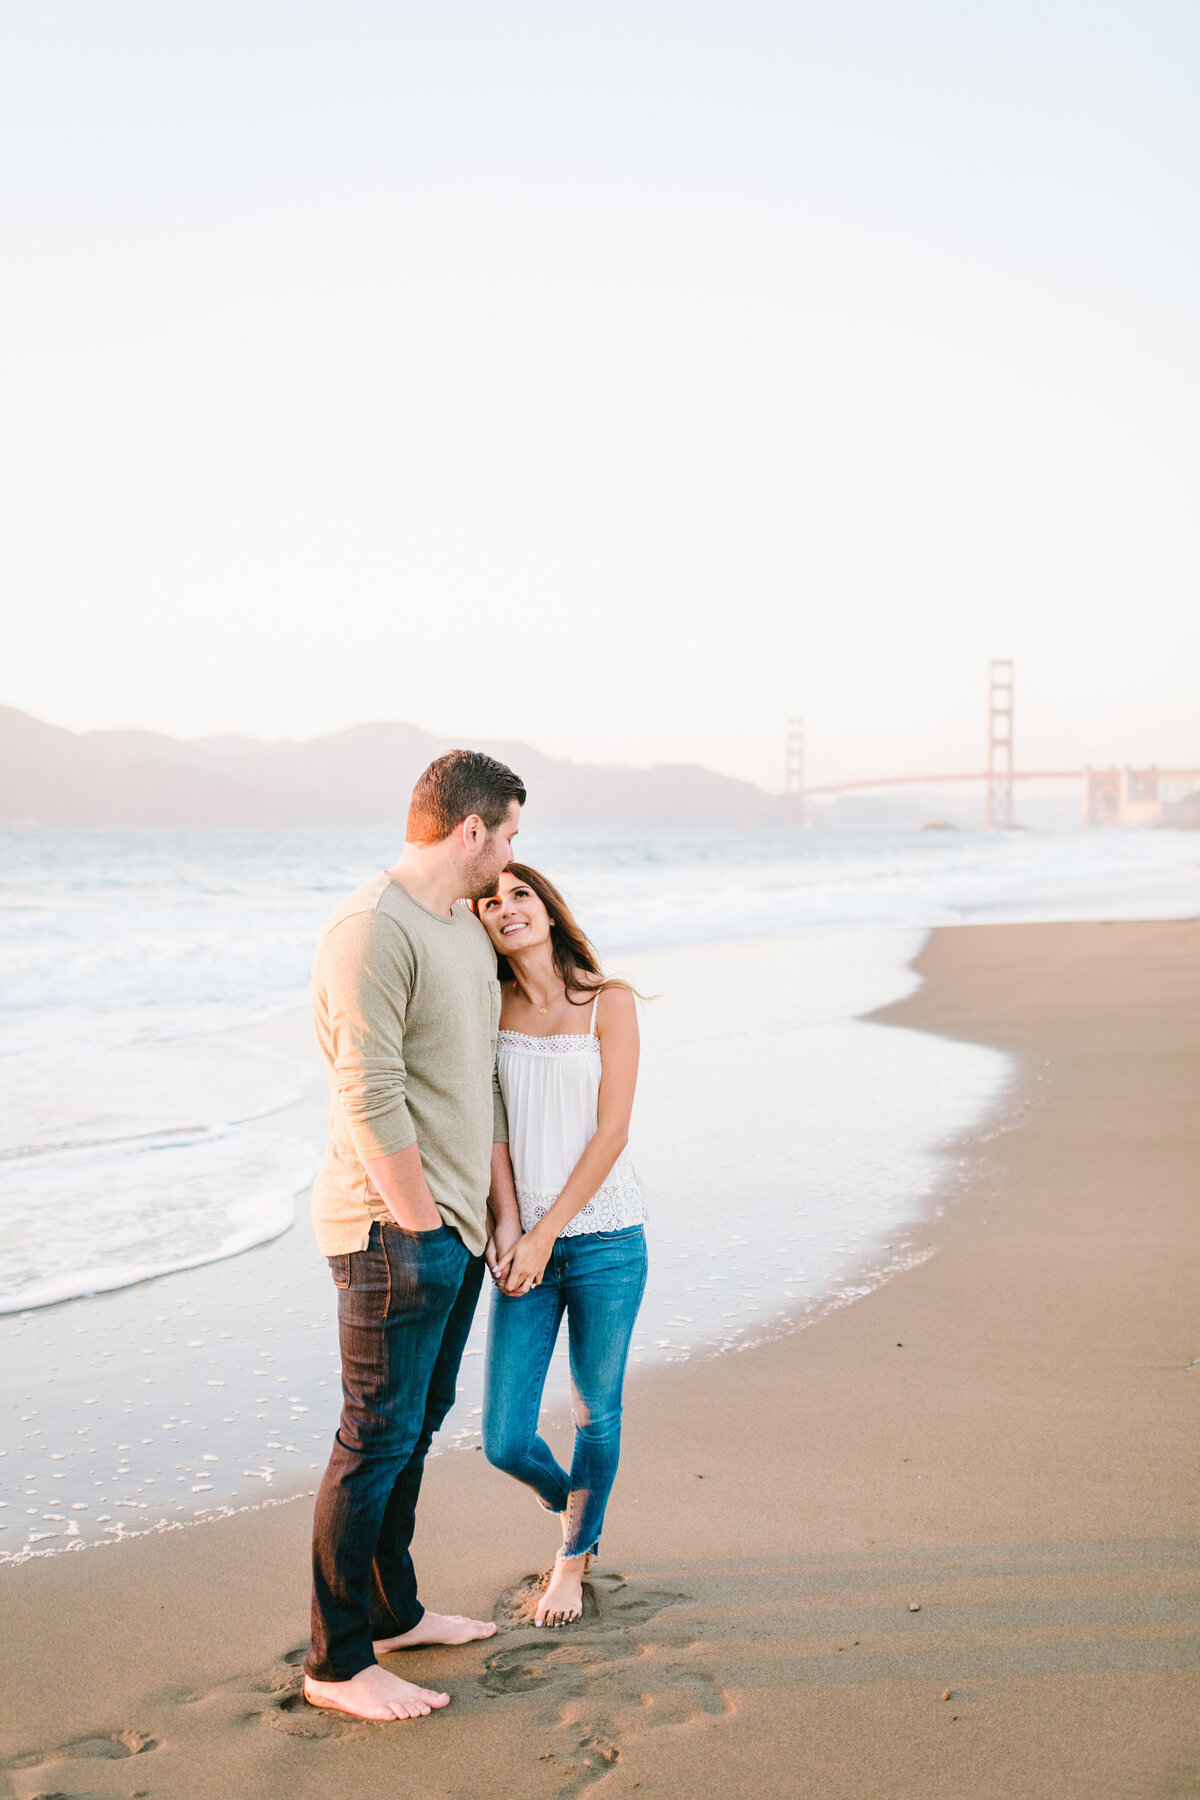 Best California and Texas Engagement Photographer-Jodee Debes Photography-81